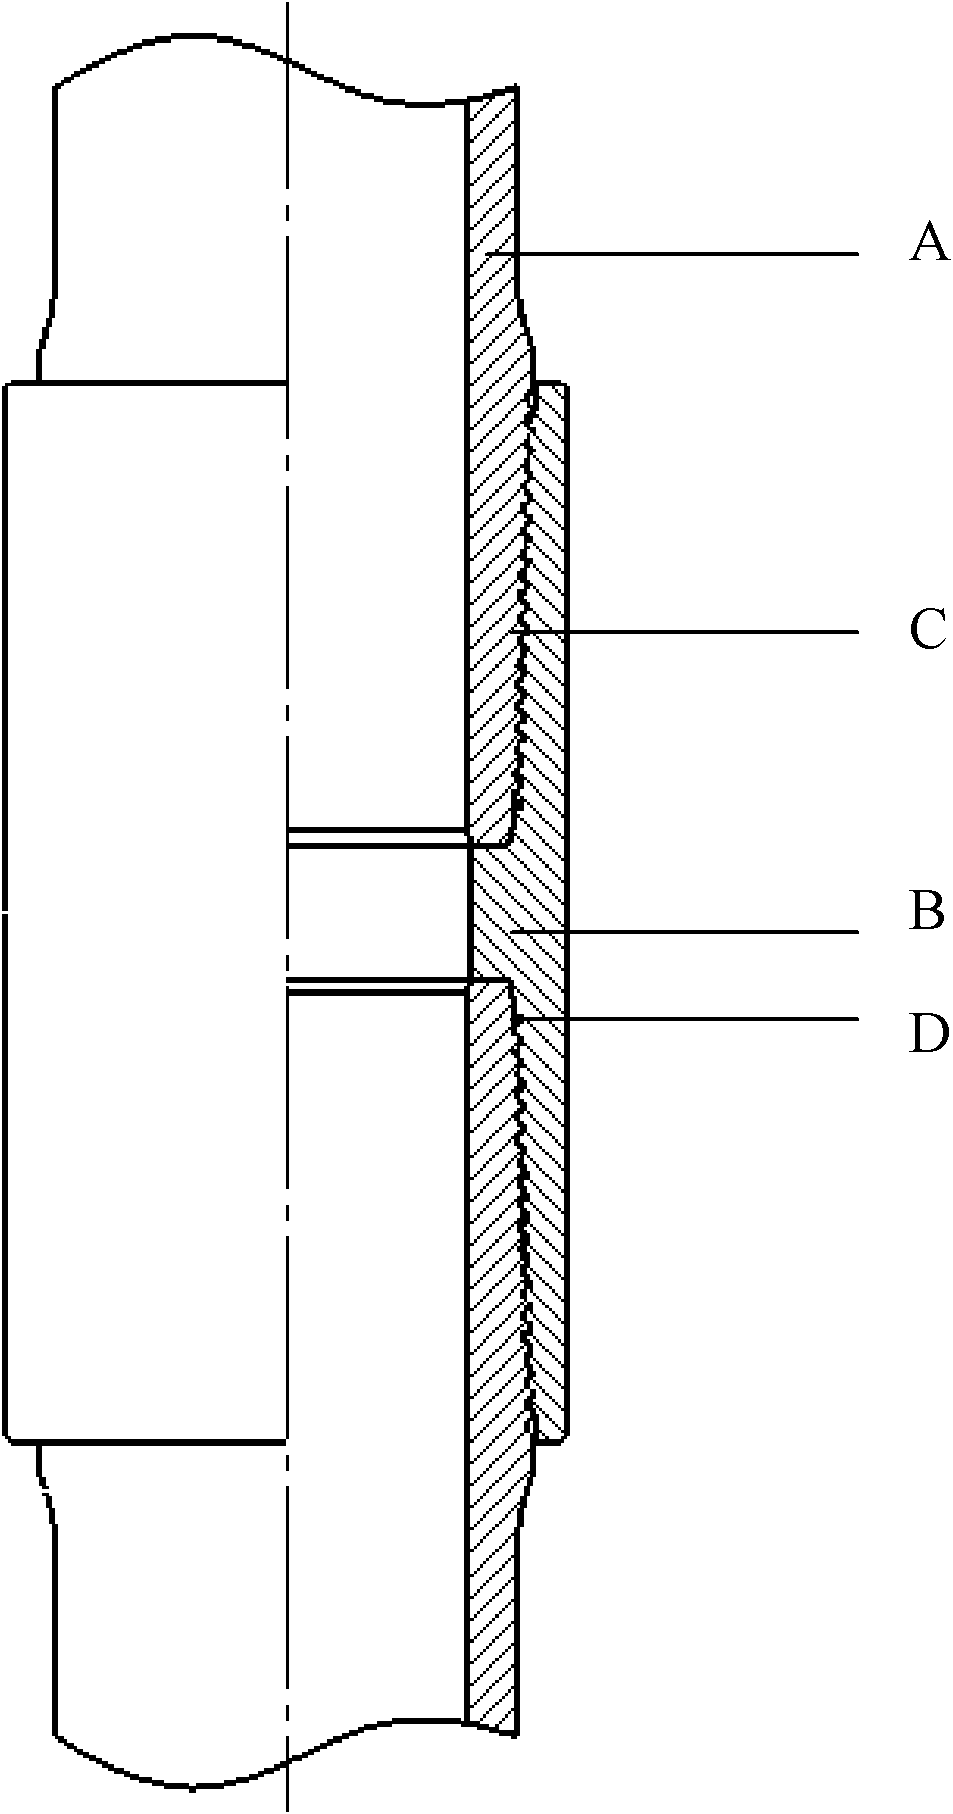 Thread joint structure for high-performance oil casing